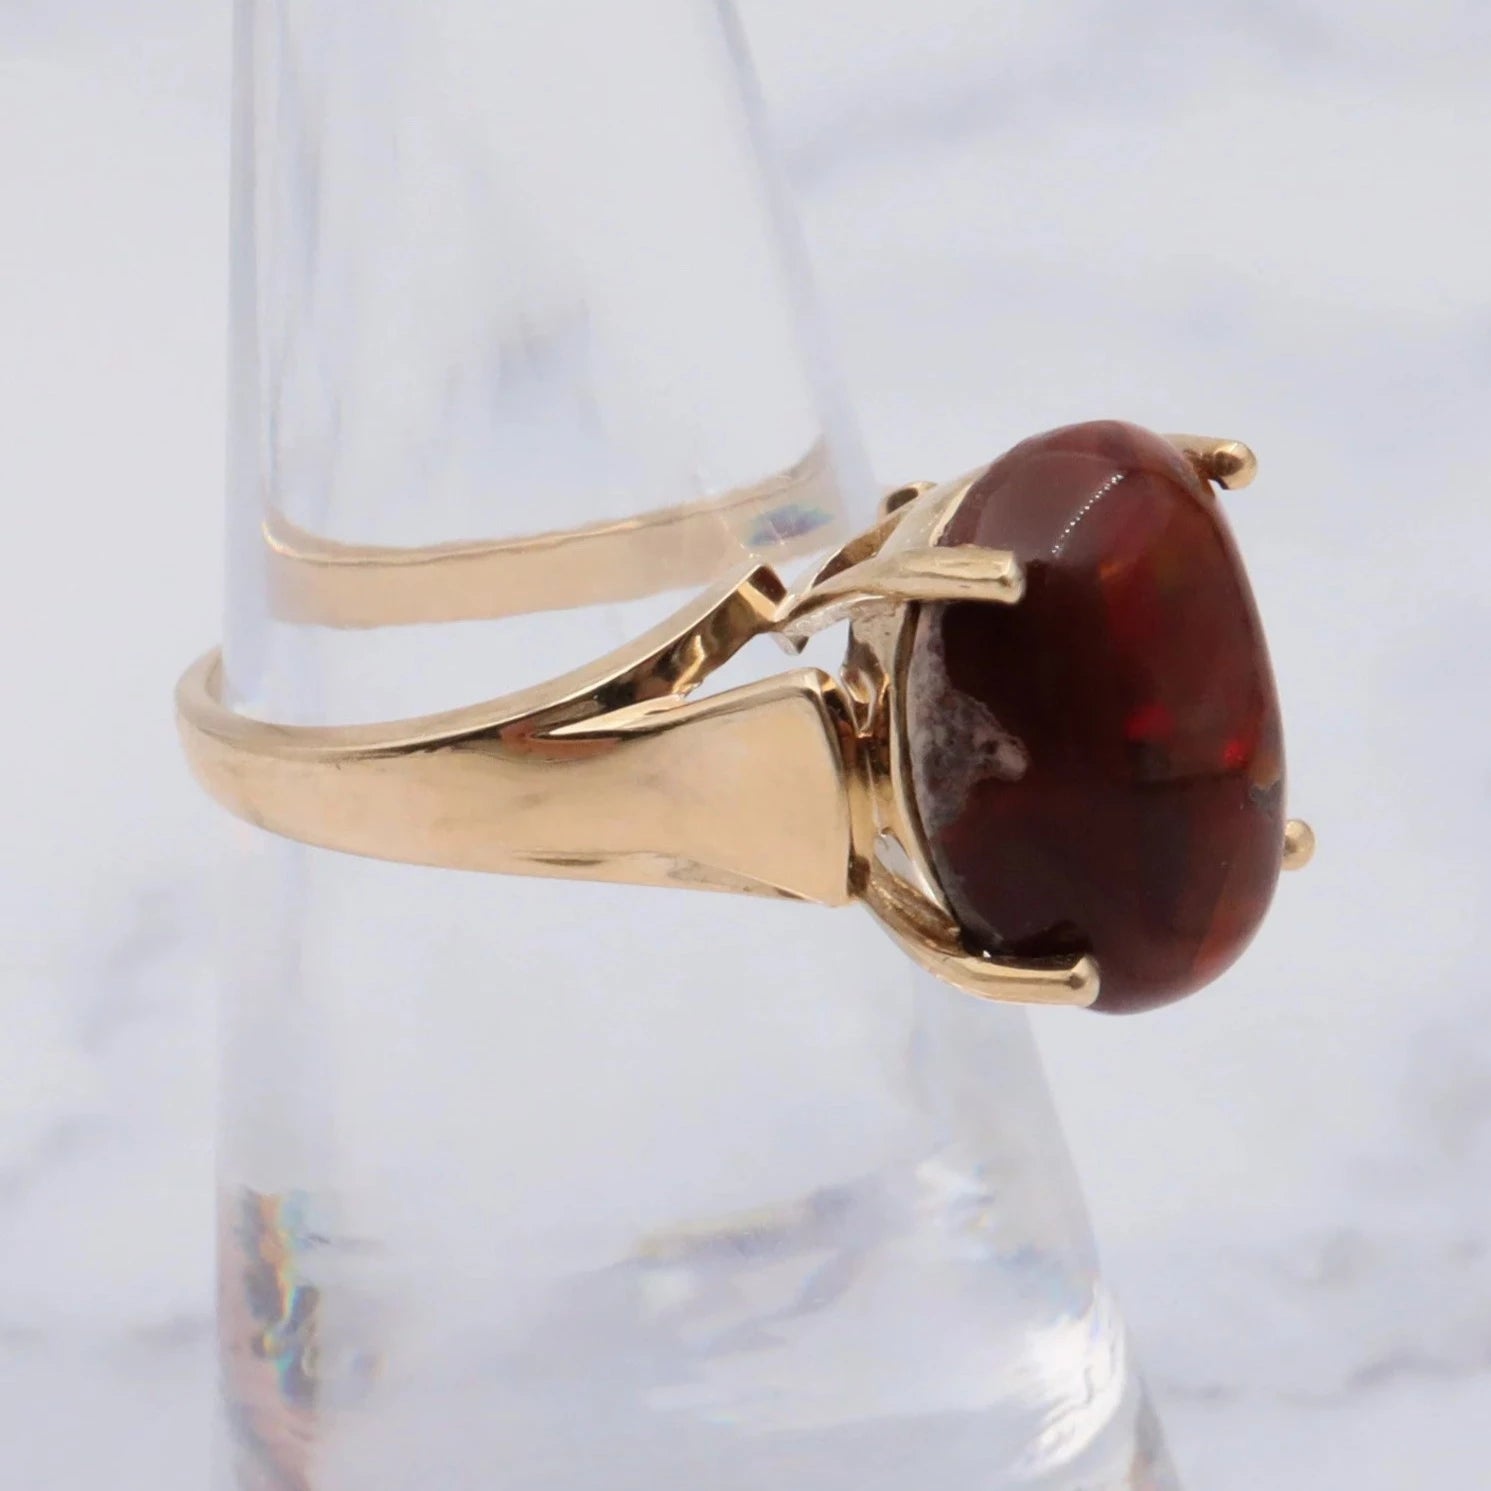 Vintage 10K Gold Mexican Fire Opal with Matrix Ring - Size 5 3/4